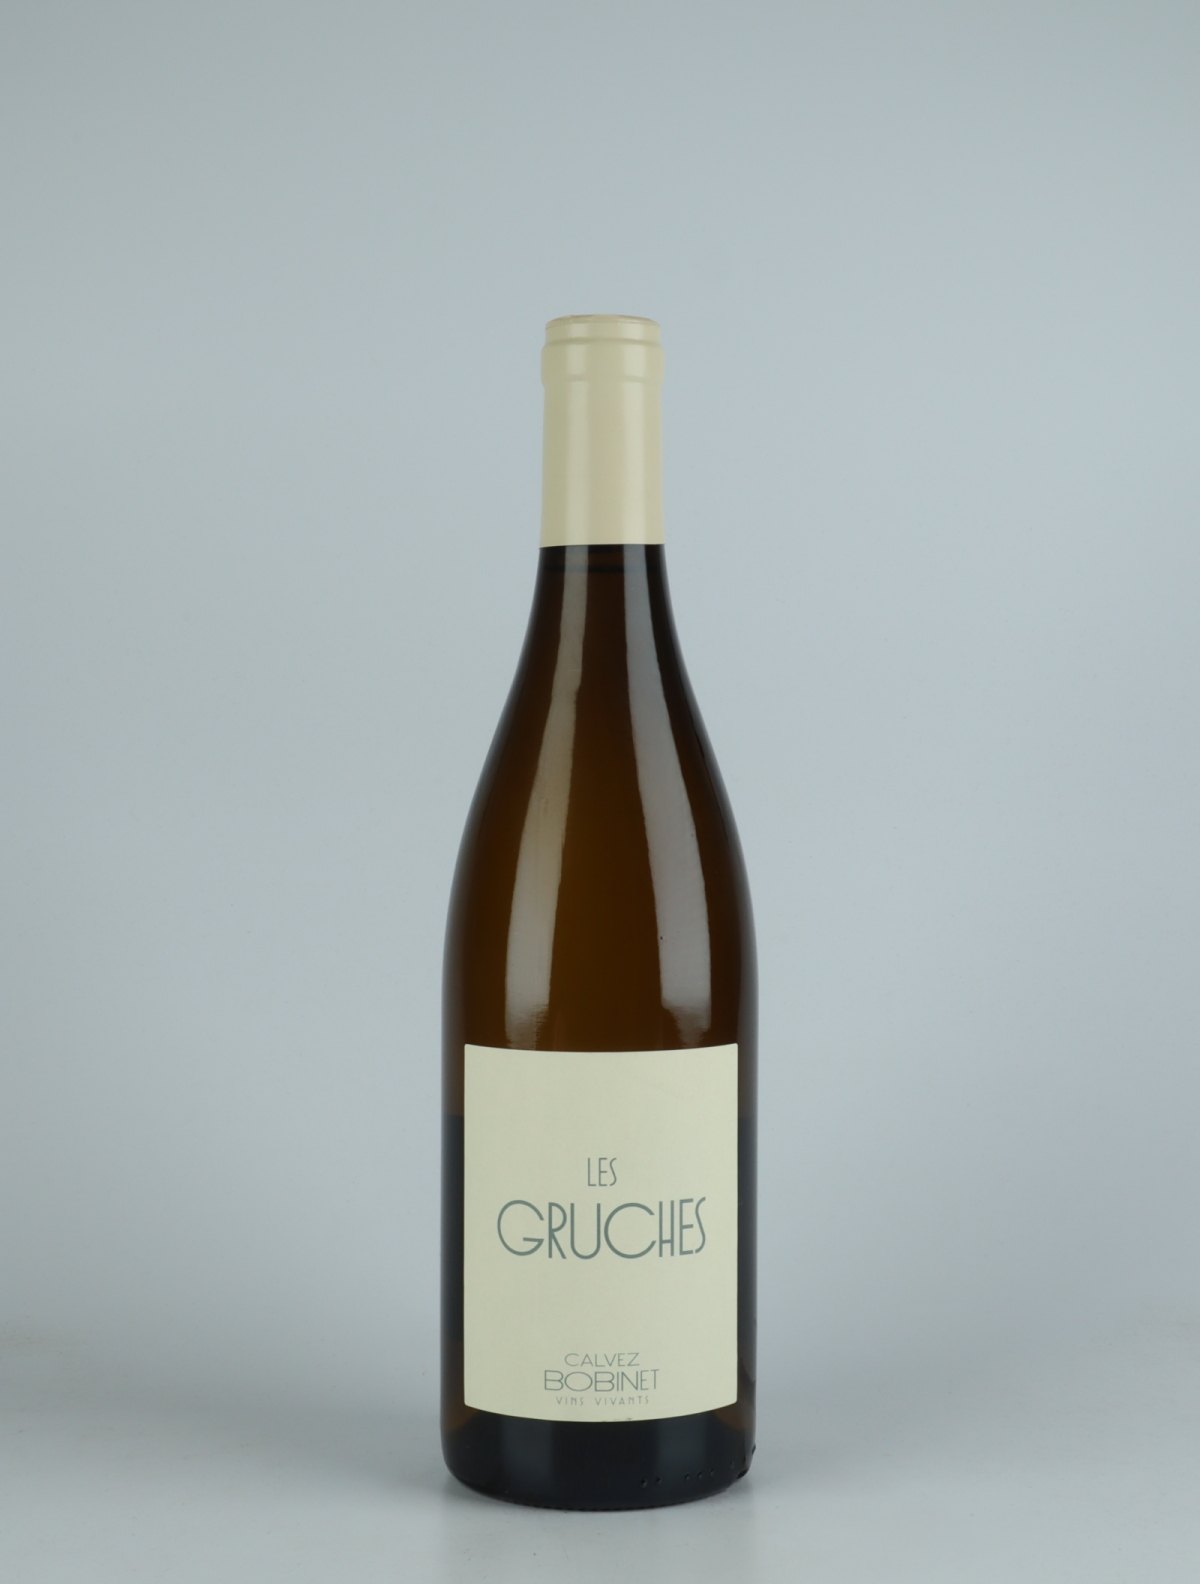 A bottle  Saumur Blanc - Les Gruches White wine from Domaine Bobinet, Loire in France